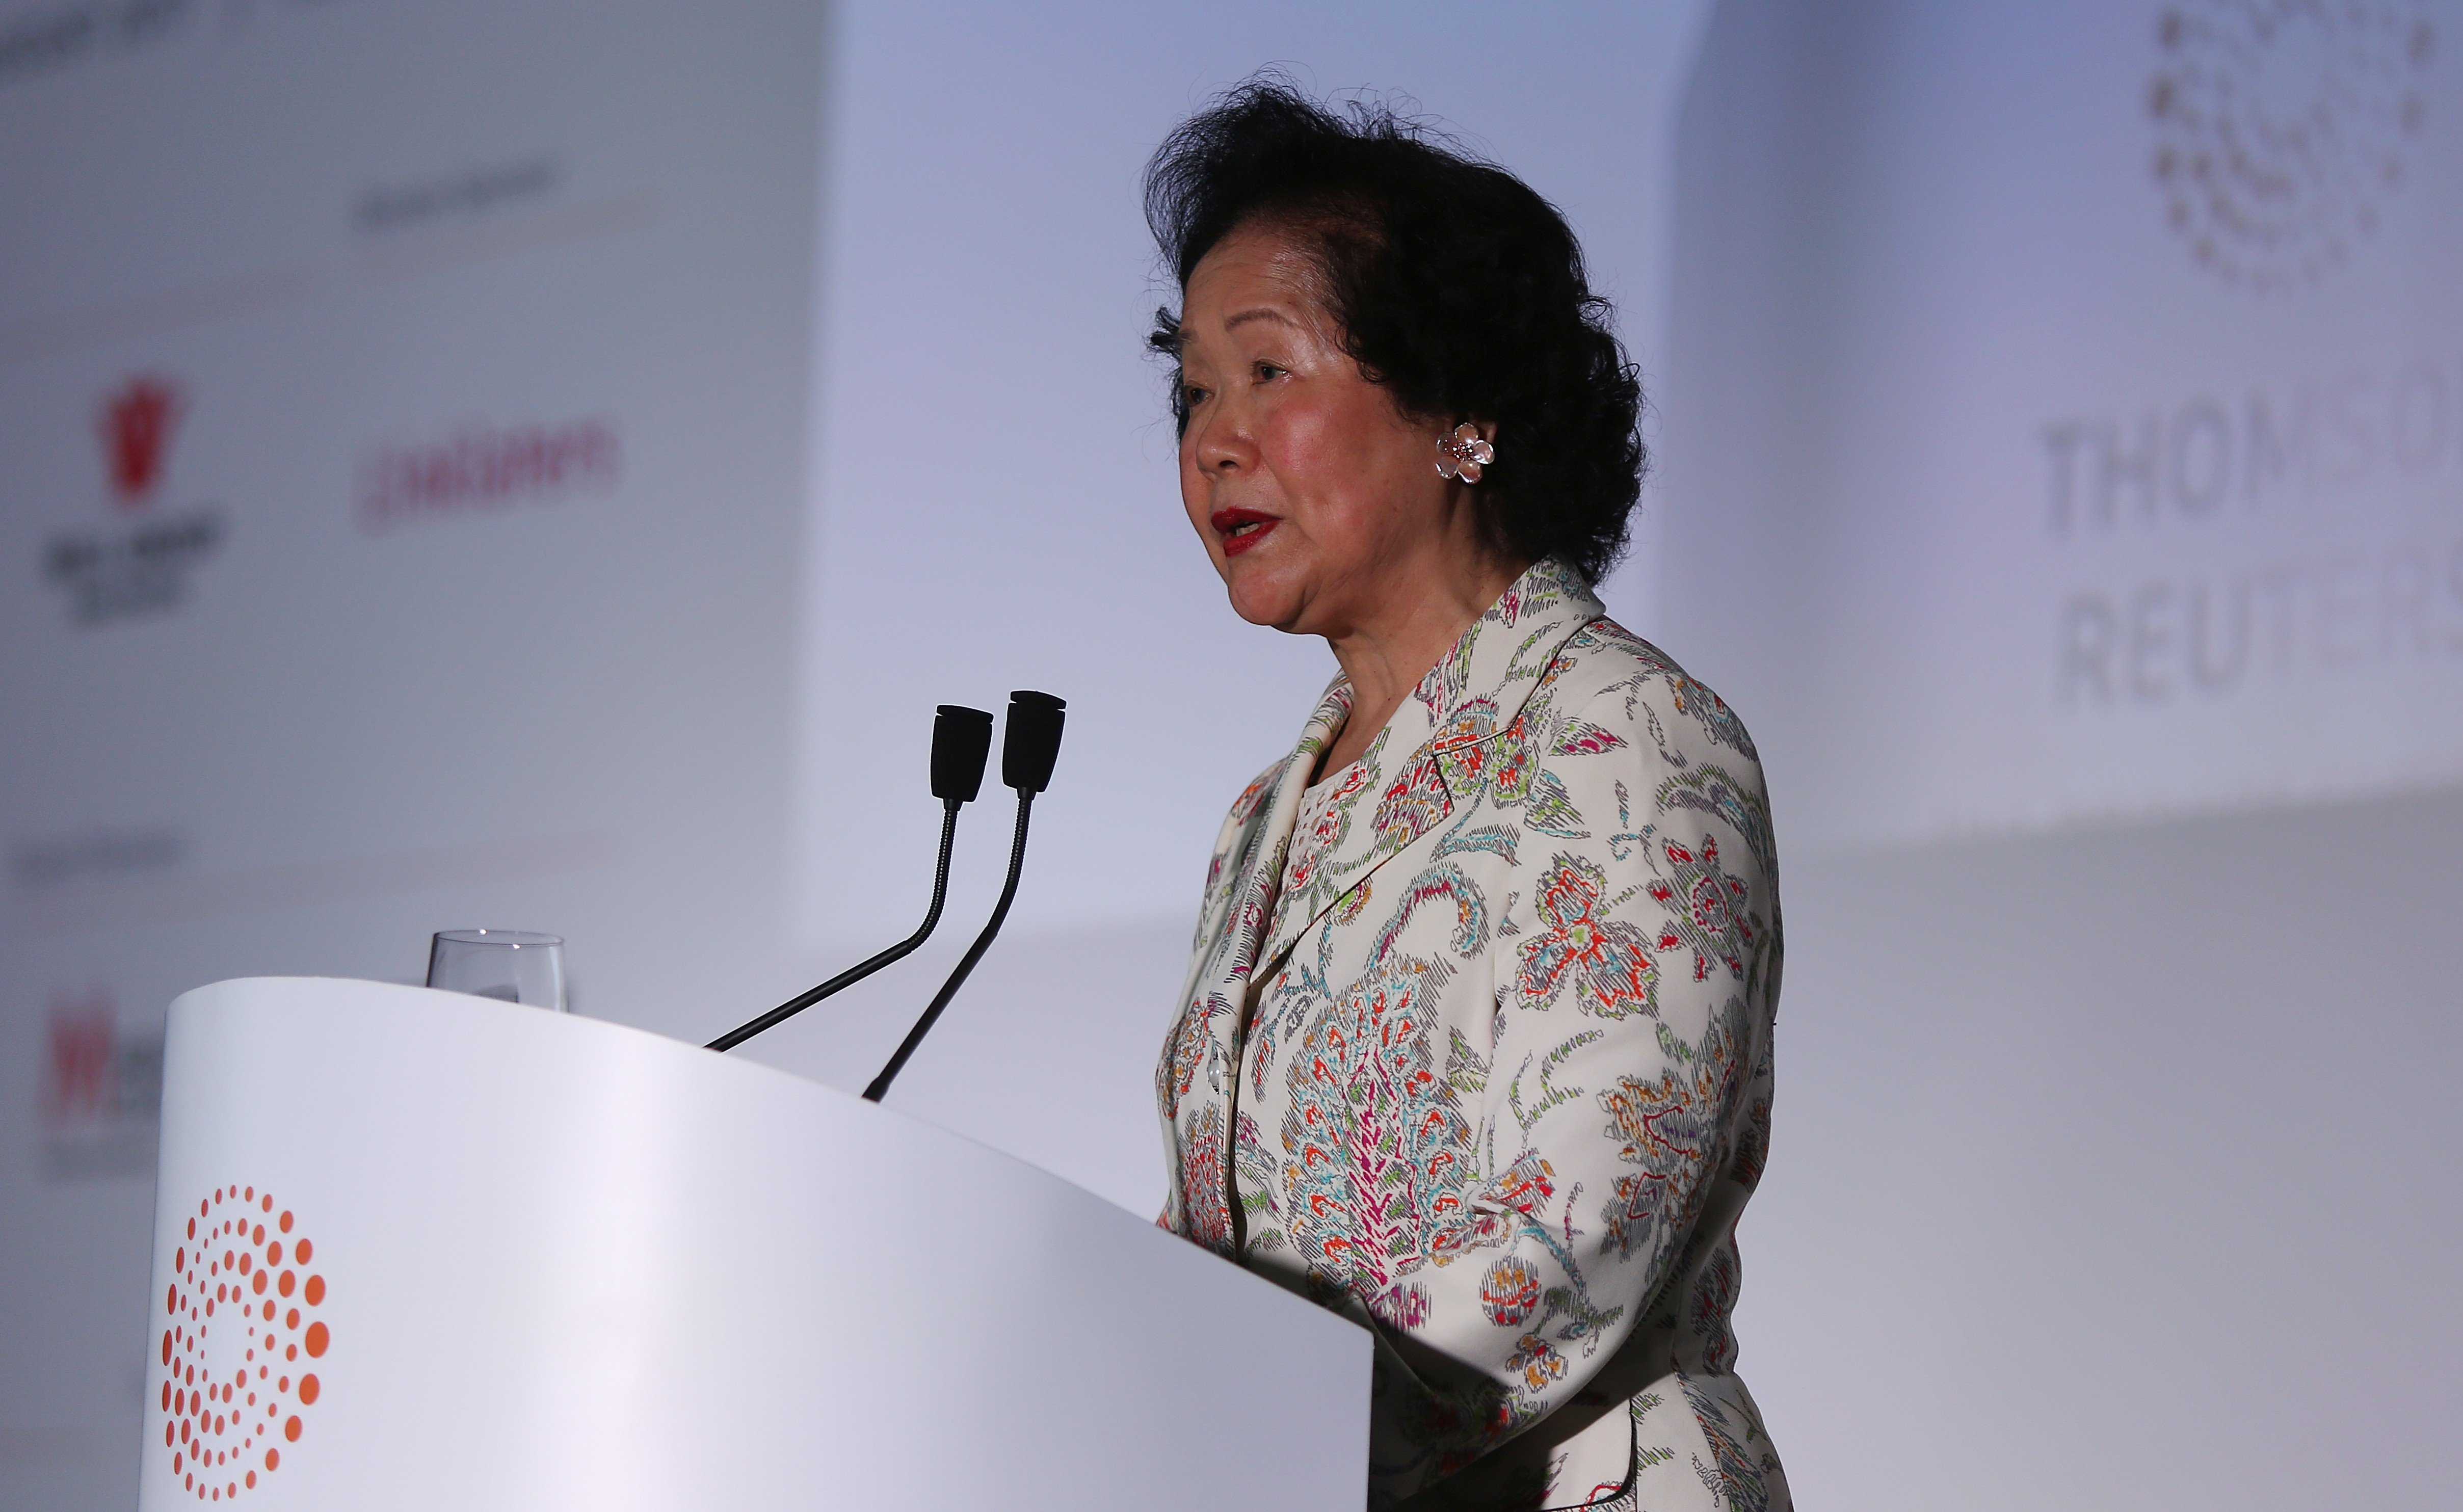 Former chief secretary and Legislative Council member Anson Chan has received international recognition for her criticism of Beijing’s role in Hong Kong’s affairs. Photo: Xiaomei Chen